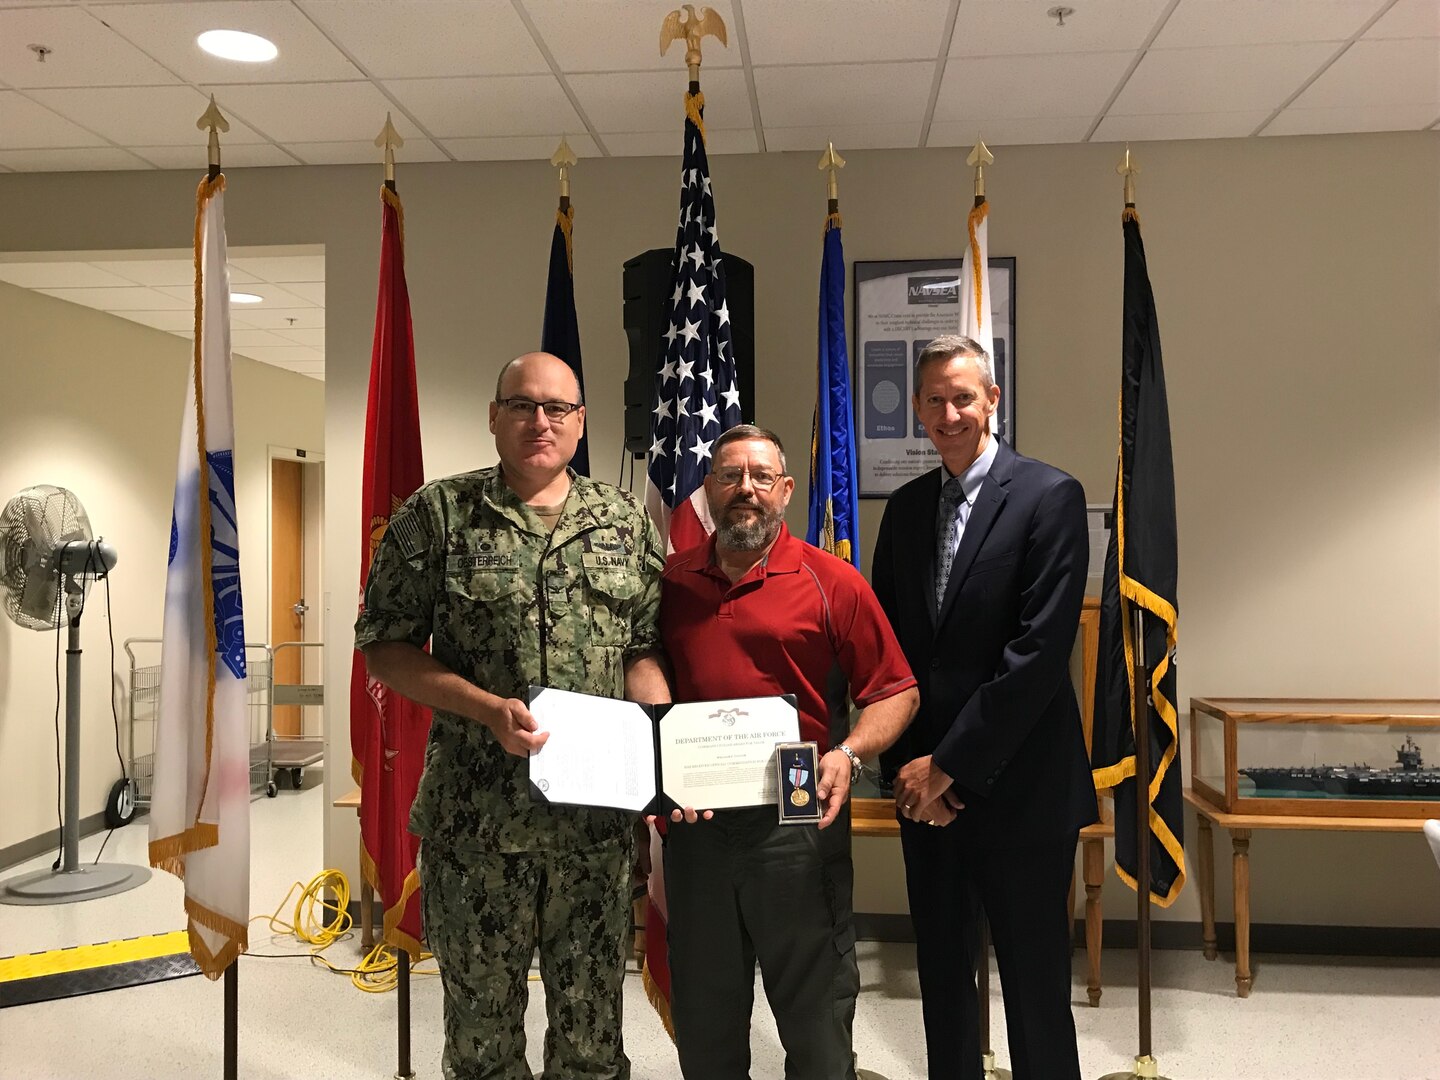 NSWC Crane employee was awarded one of the highest civilian honors for an act of bravery overseas. William (Bill) Taylor, an AC-130W Weapons Specialist at NSWC Crane, received the Command Civilian Service Medal for Valor and Courage in a combat zone for saving seven lives and extinguishing a fire.